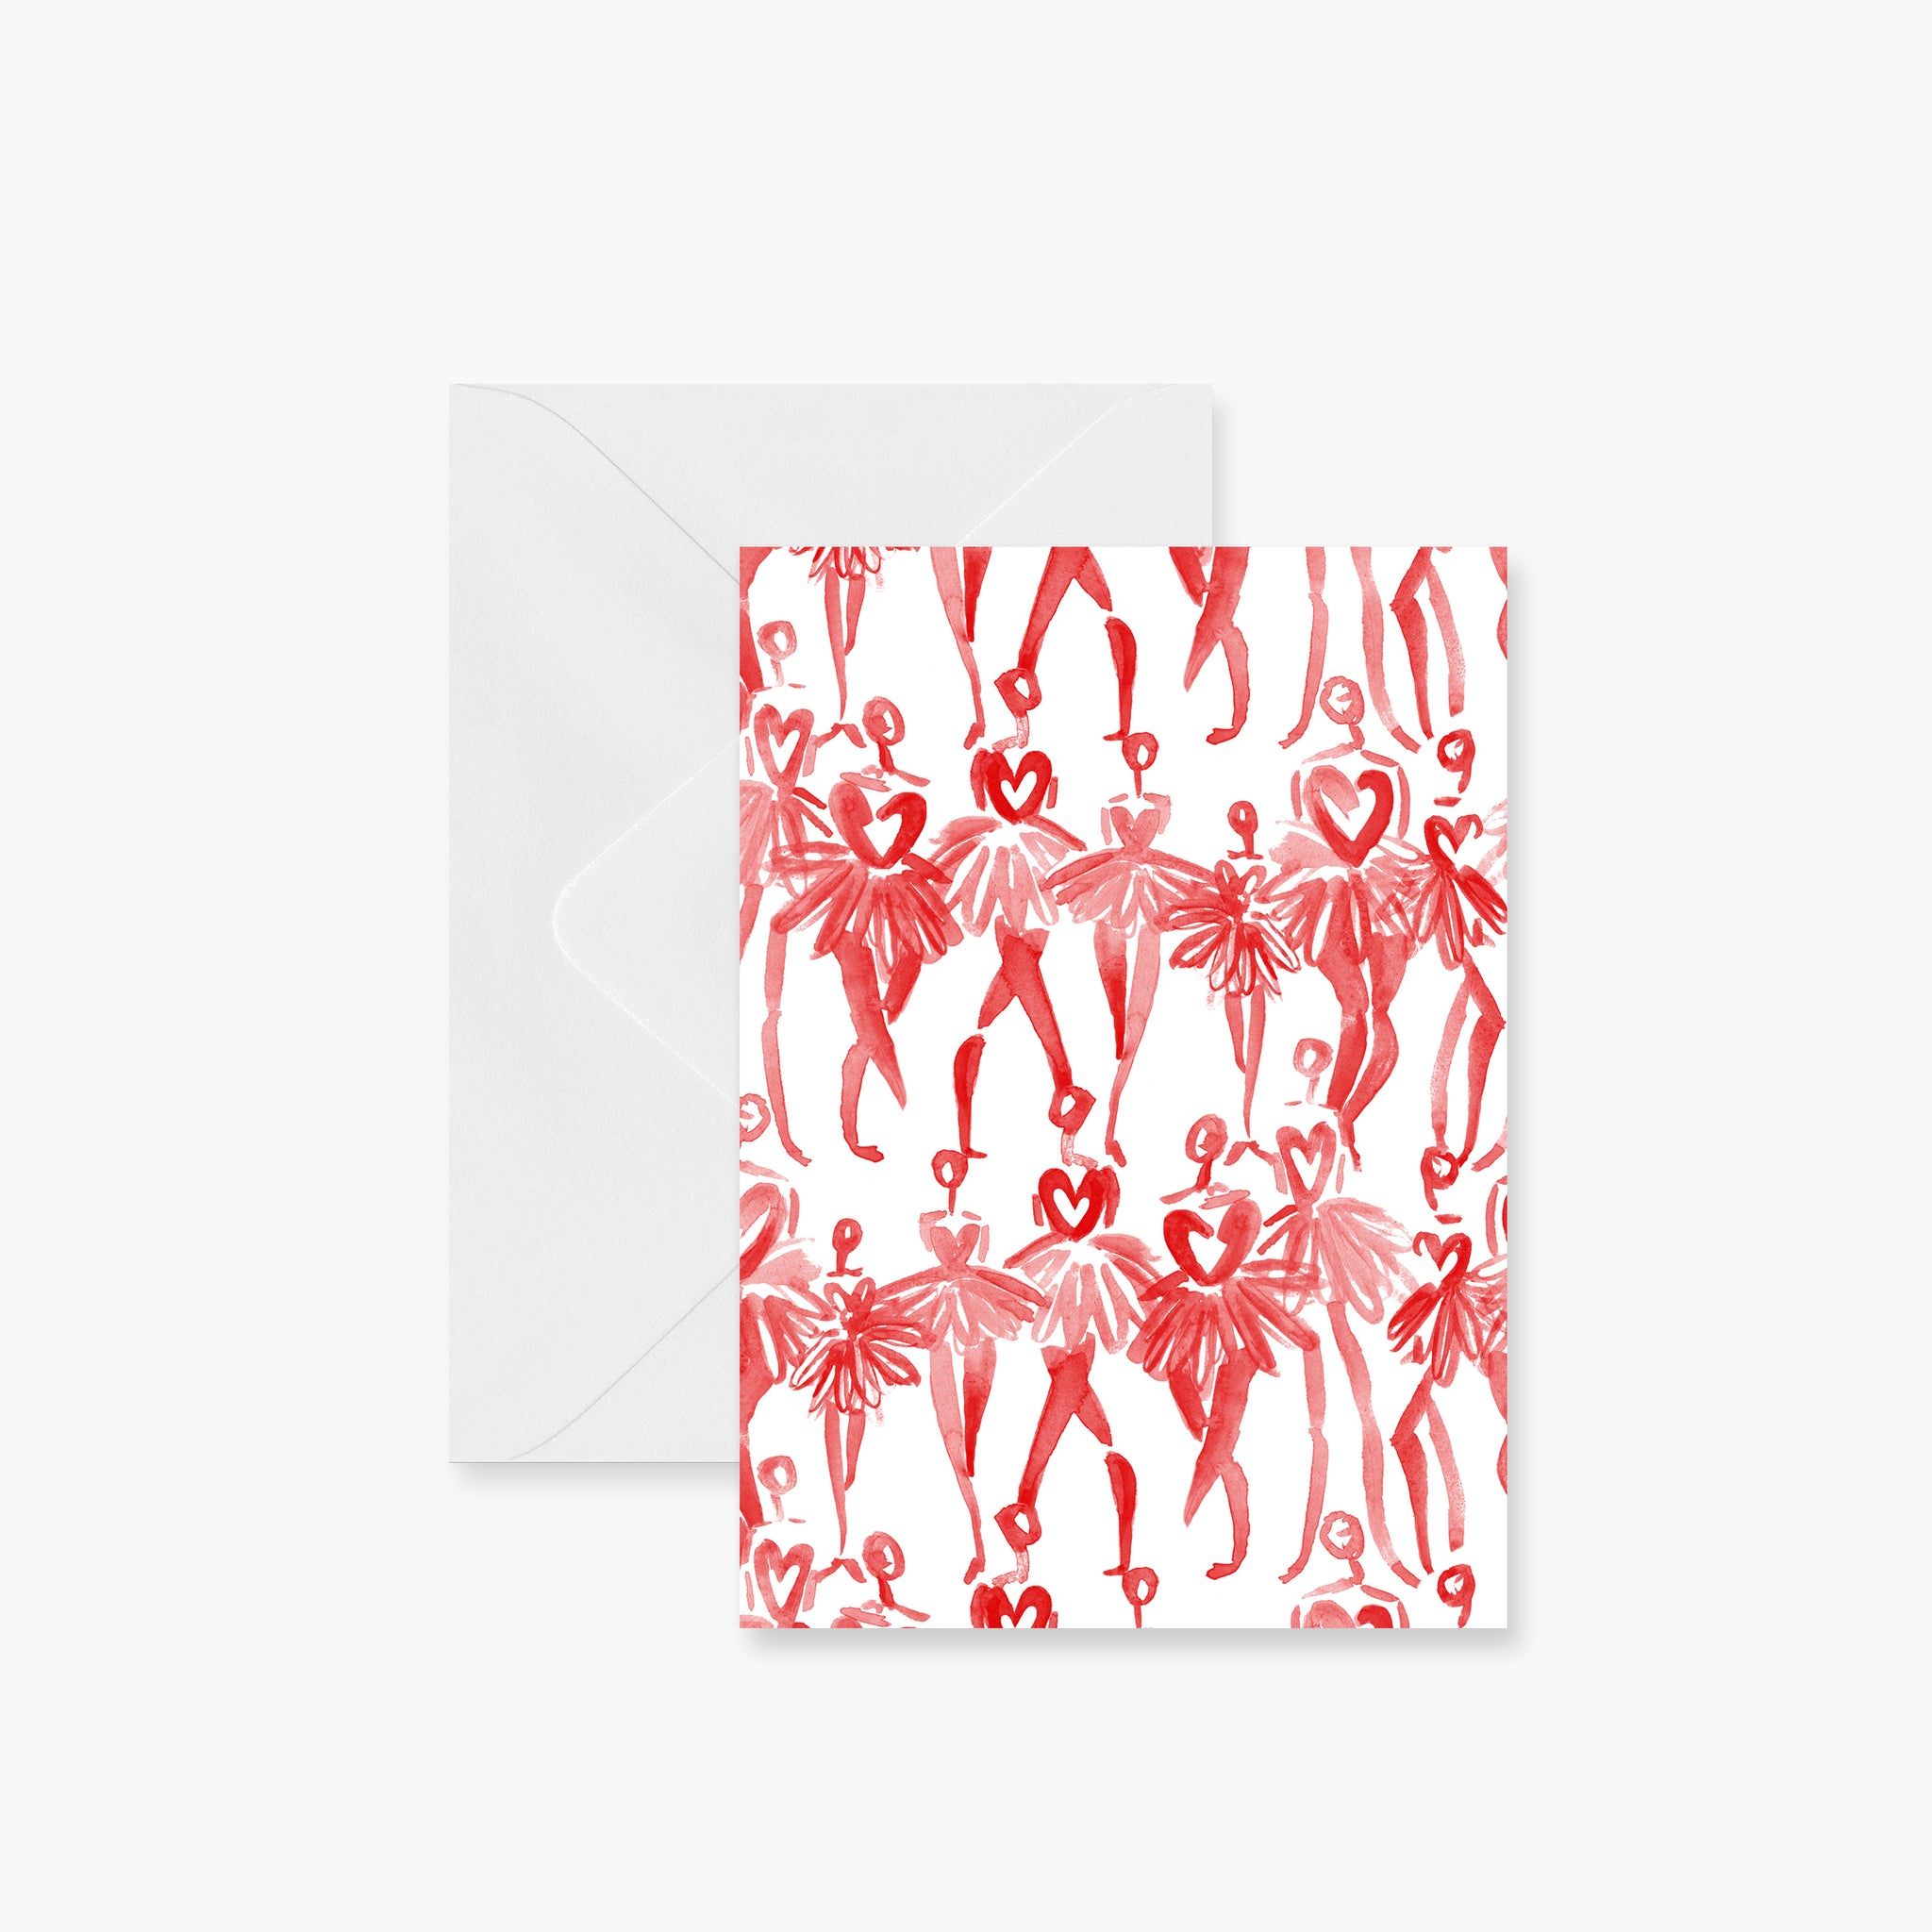 Bodies and Hearts Greeting Card